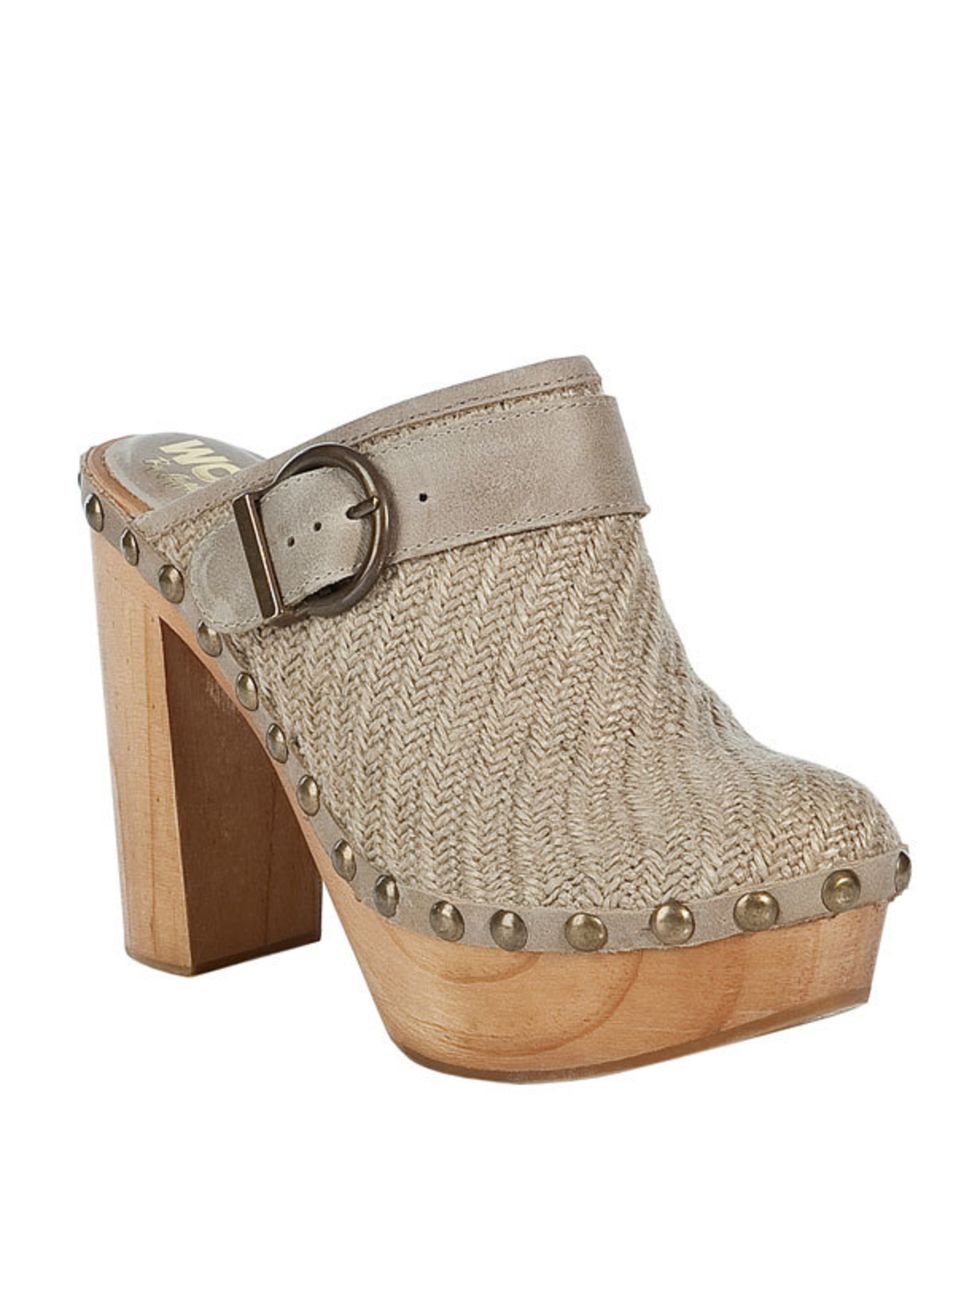 <p>Beige raffia clogs, £116, by Jeffrey Campbell at <a href="http://www.stylebop.com/product_details.php?menu1=designer&amp;menu2=&amp;menu3=368&amp;id=18311">Stylebop</a> </p>